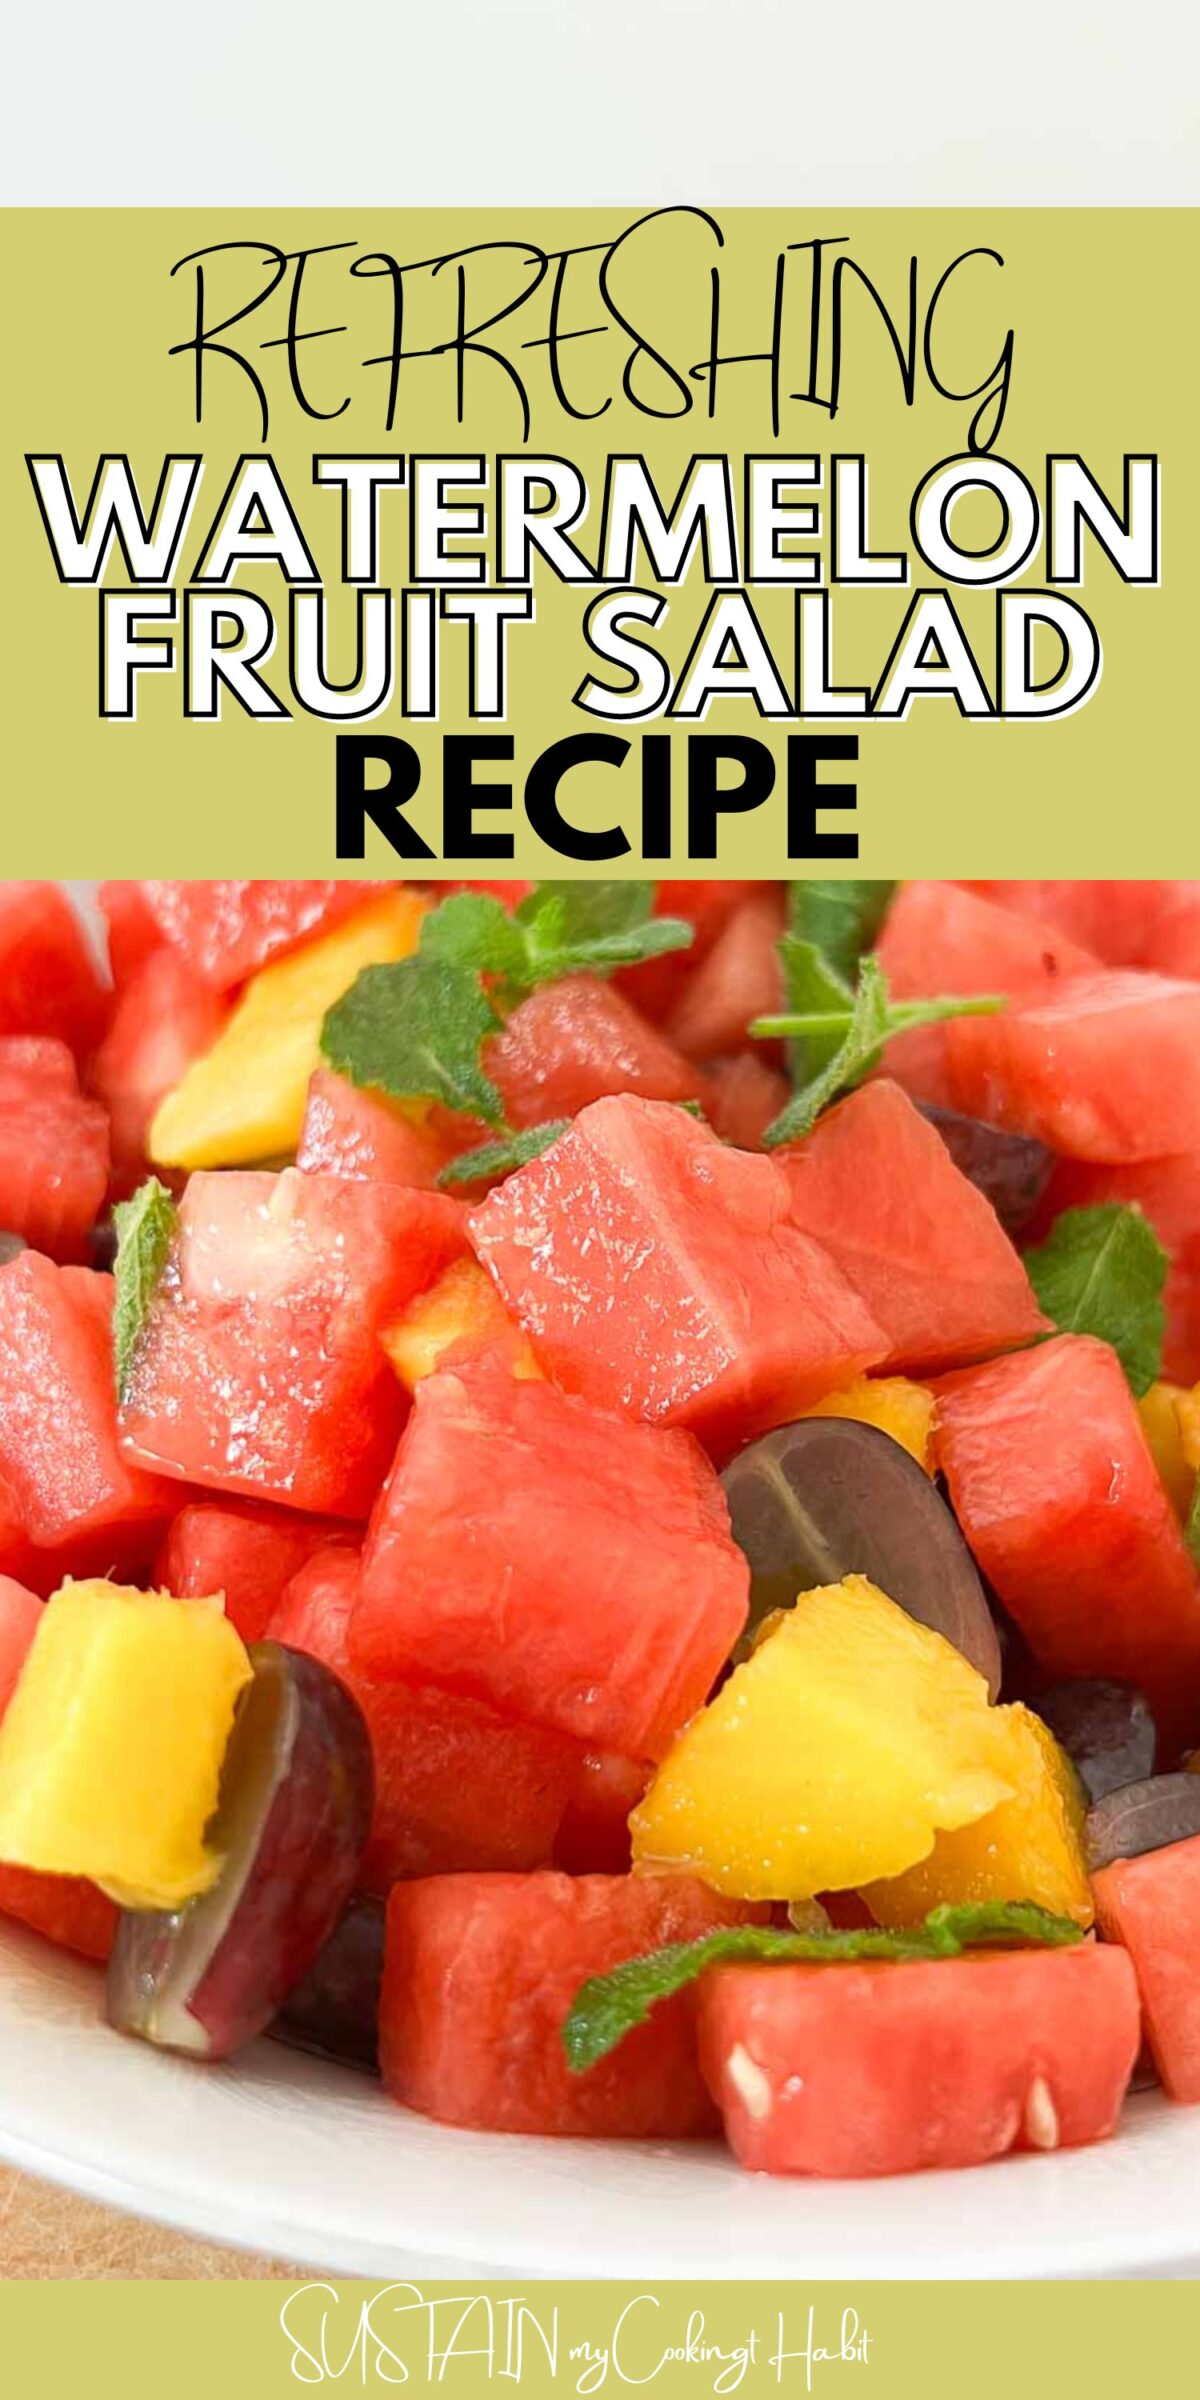 Closeup of watermelon fruit salad with text overlay.